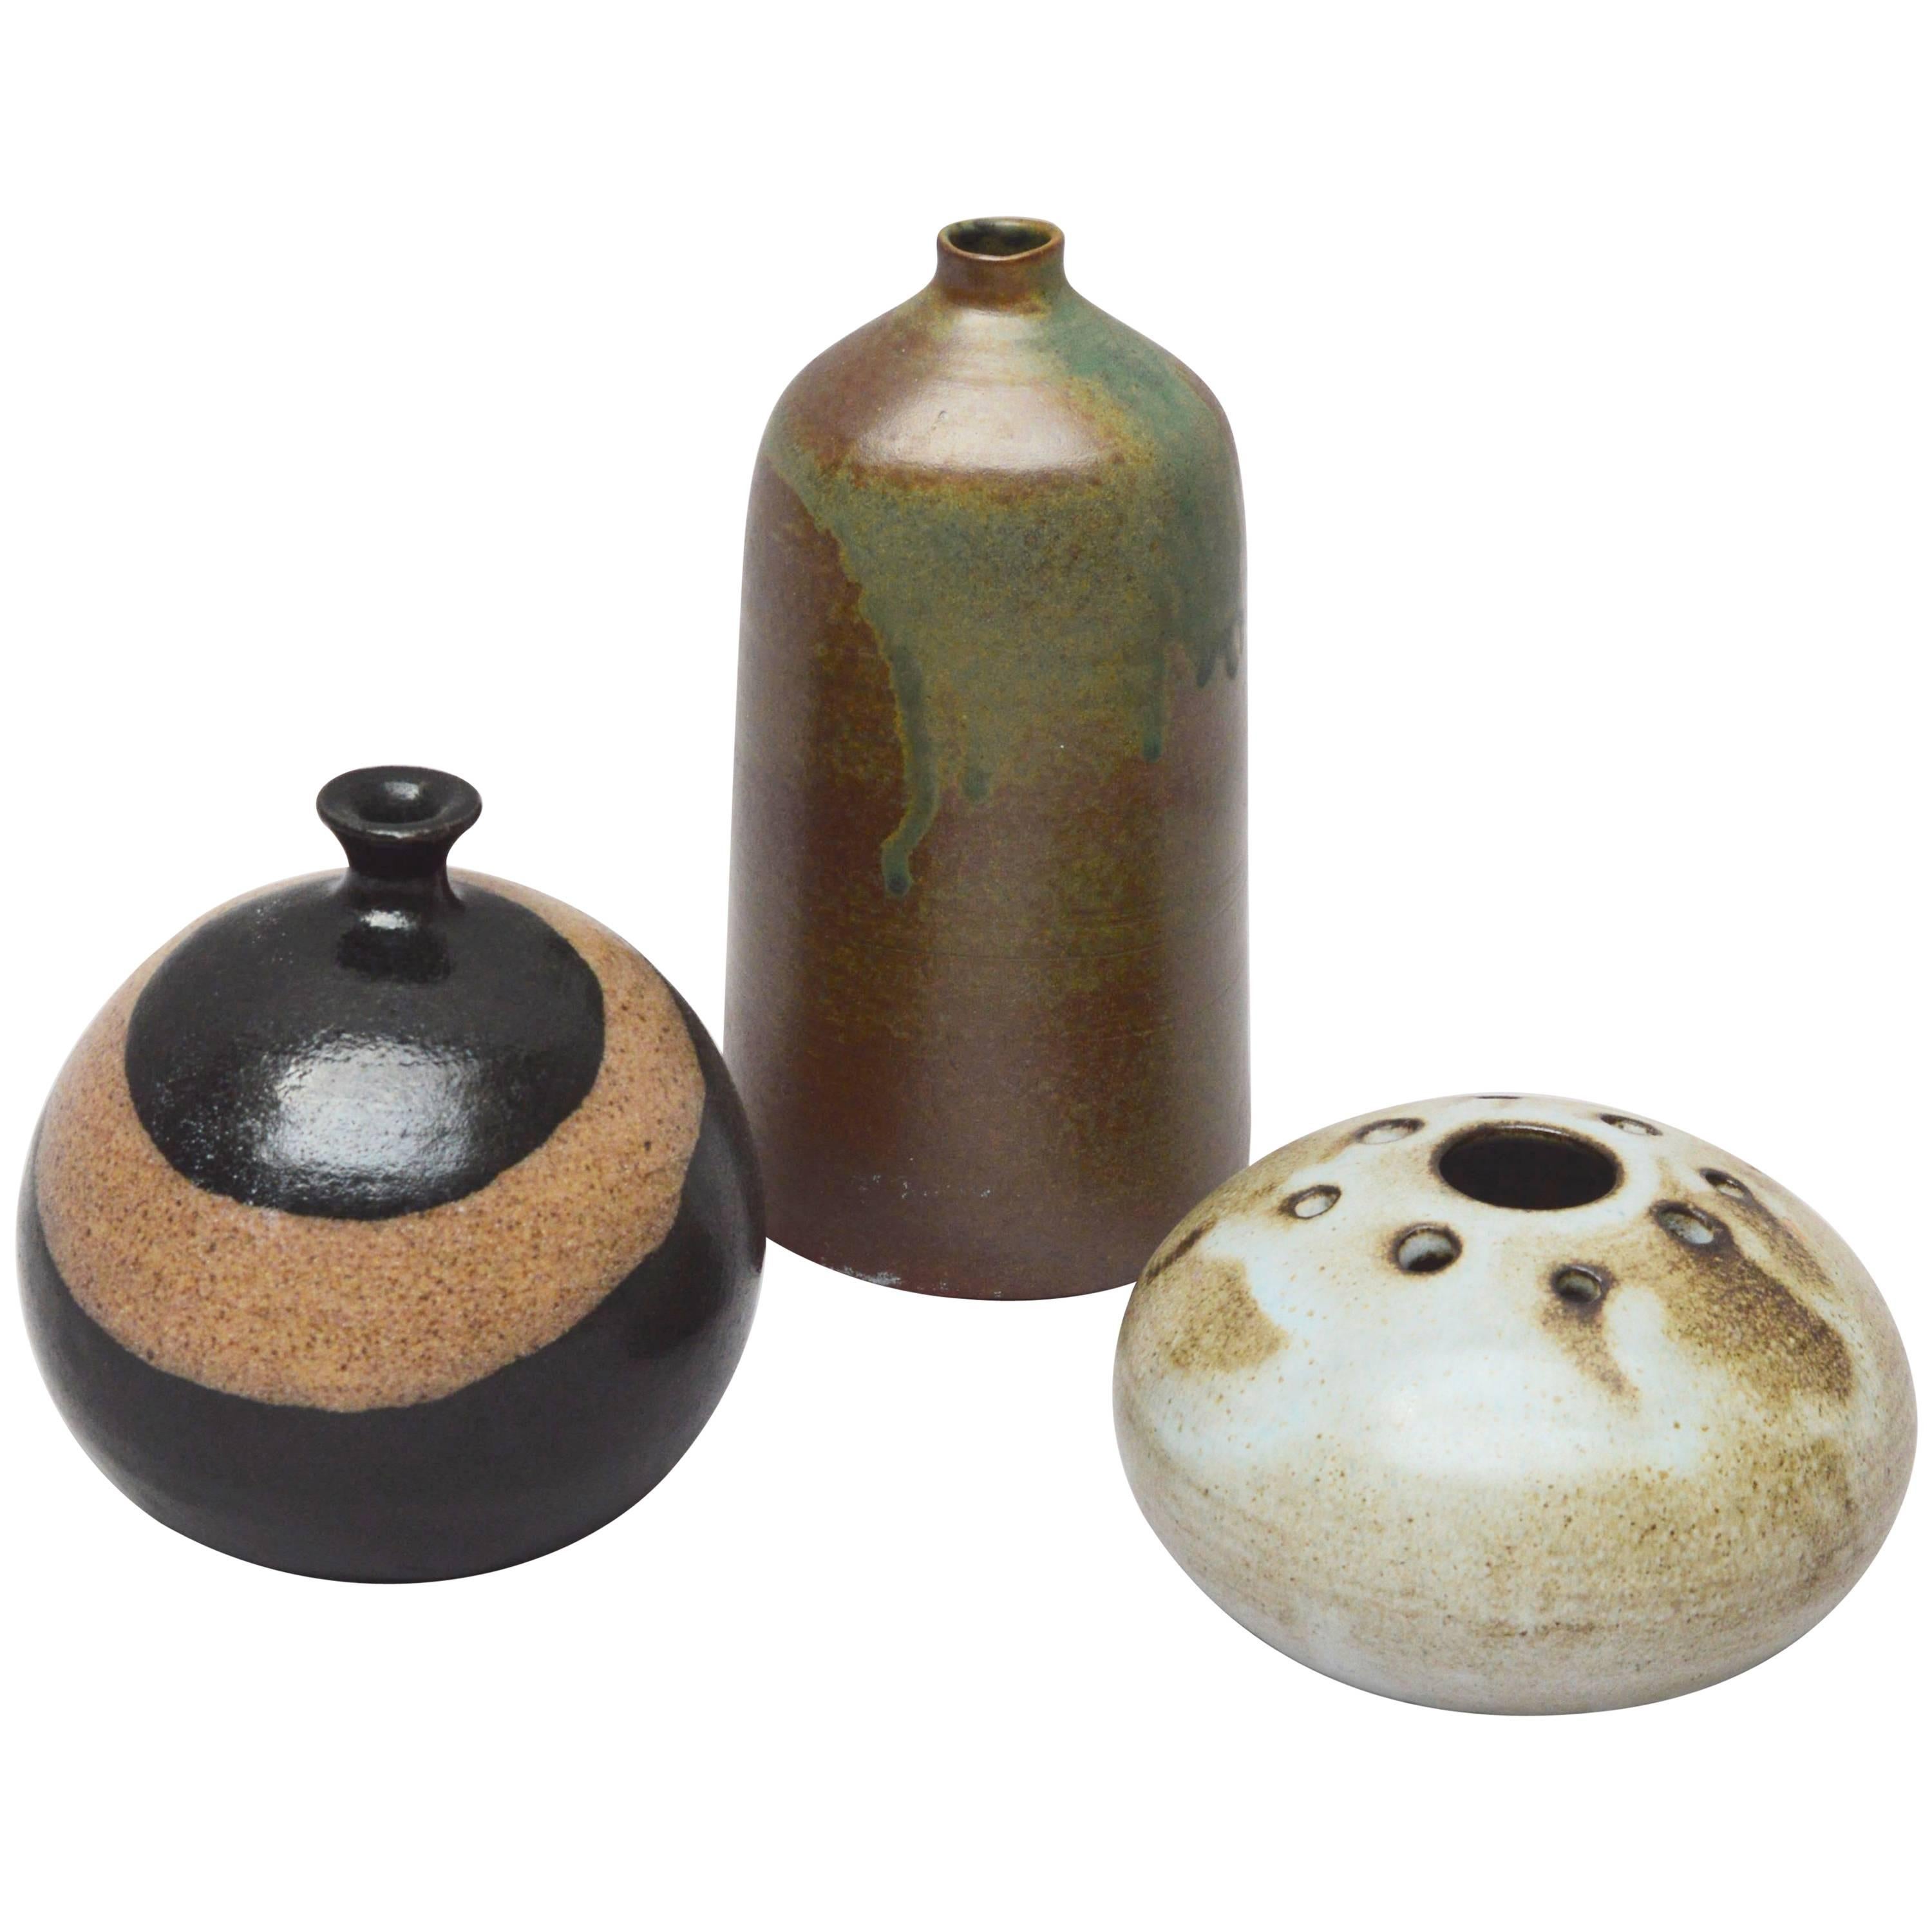  Three Signed Mid-Century Modern Art Pottery Vases  For Sale